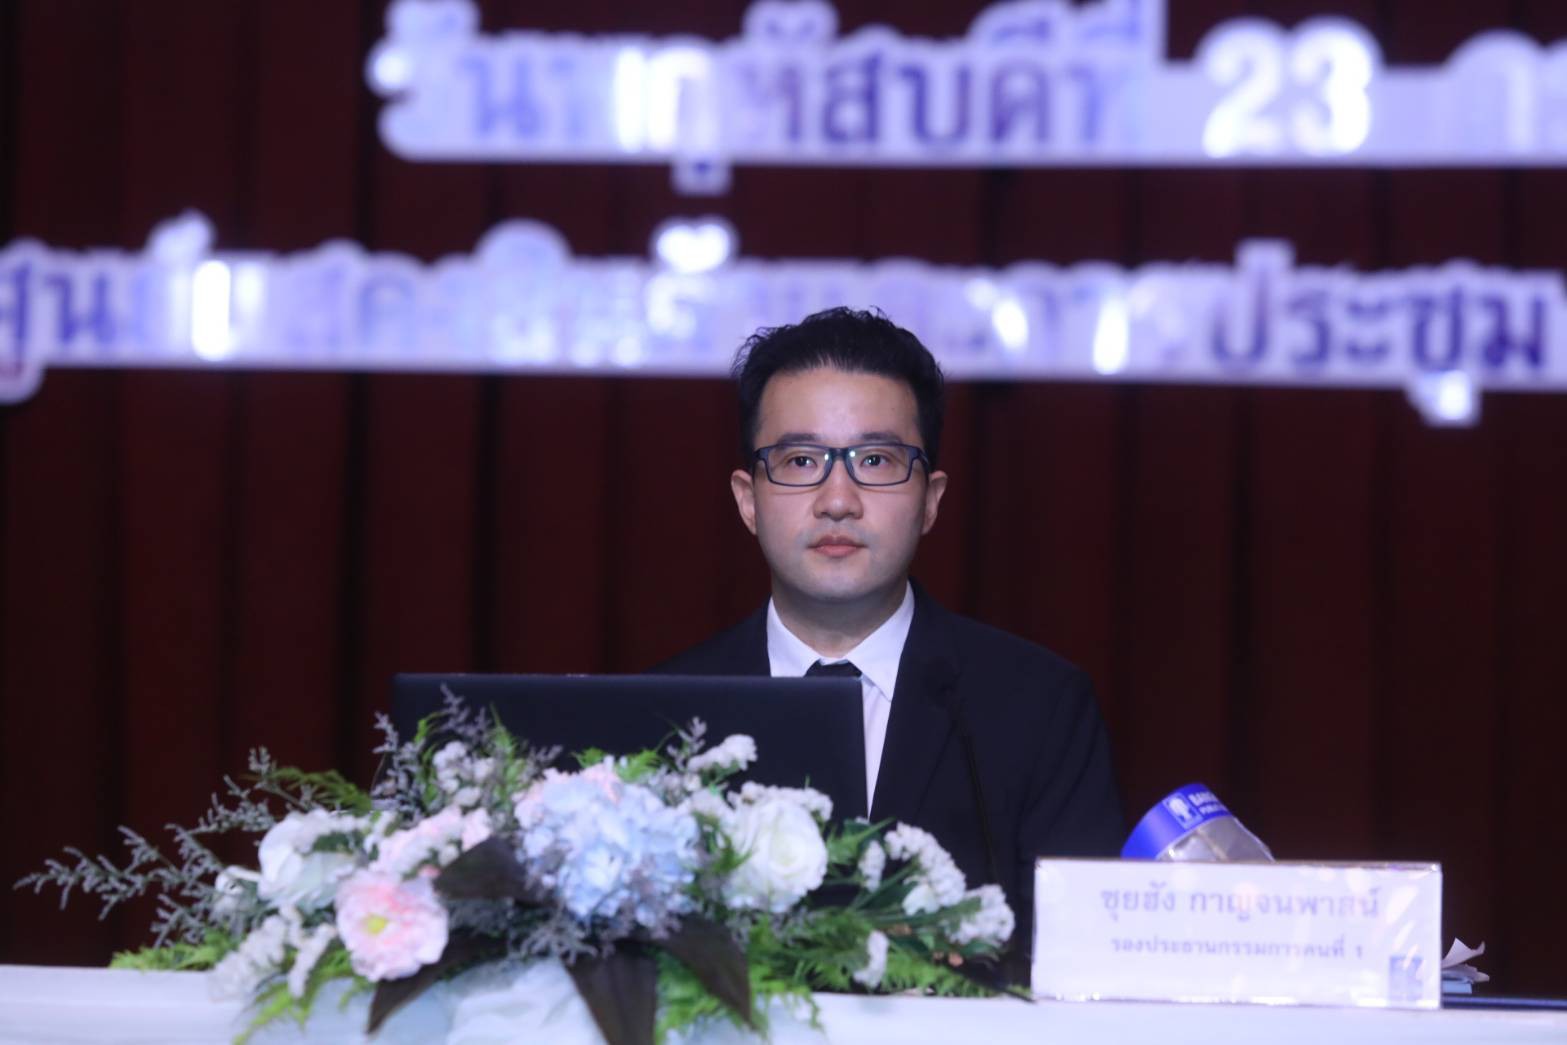 Bangkok Land announces dividend of 0.06 baht per share in the 48th general shareholder meeting